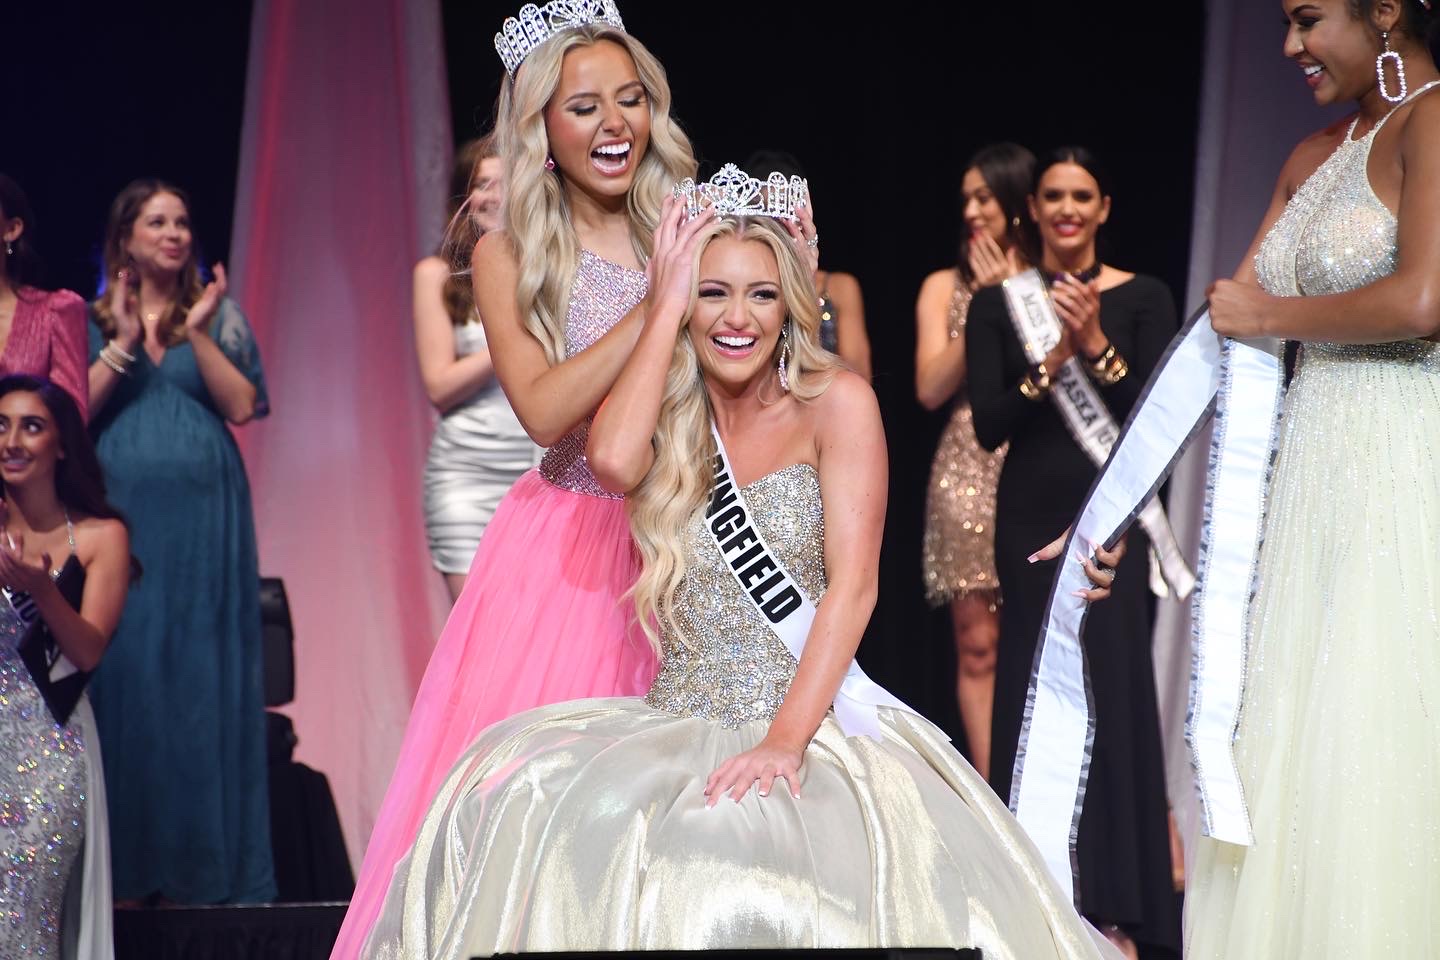 Shae Smith is crowned Miss Missouri Teen USA 2022